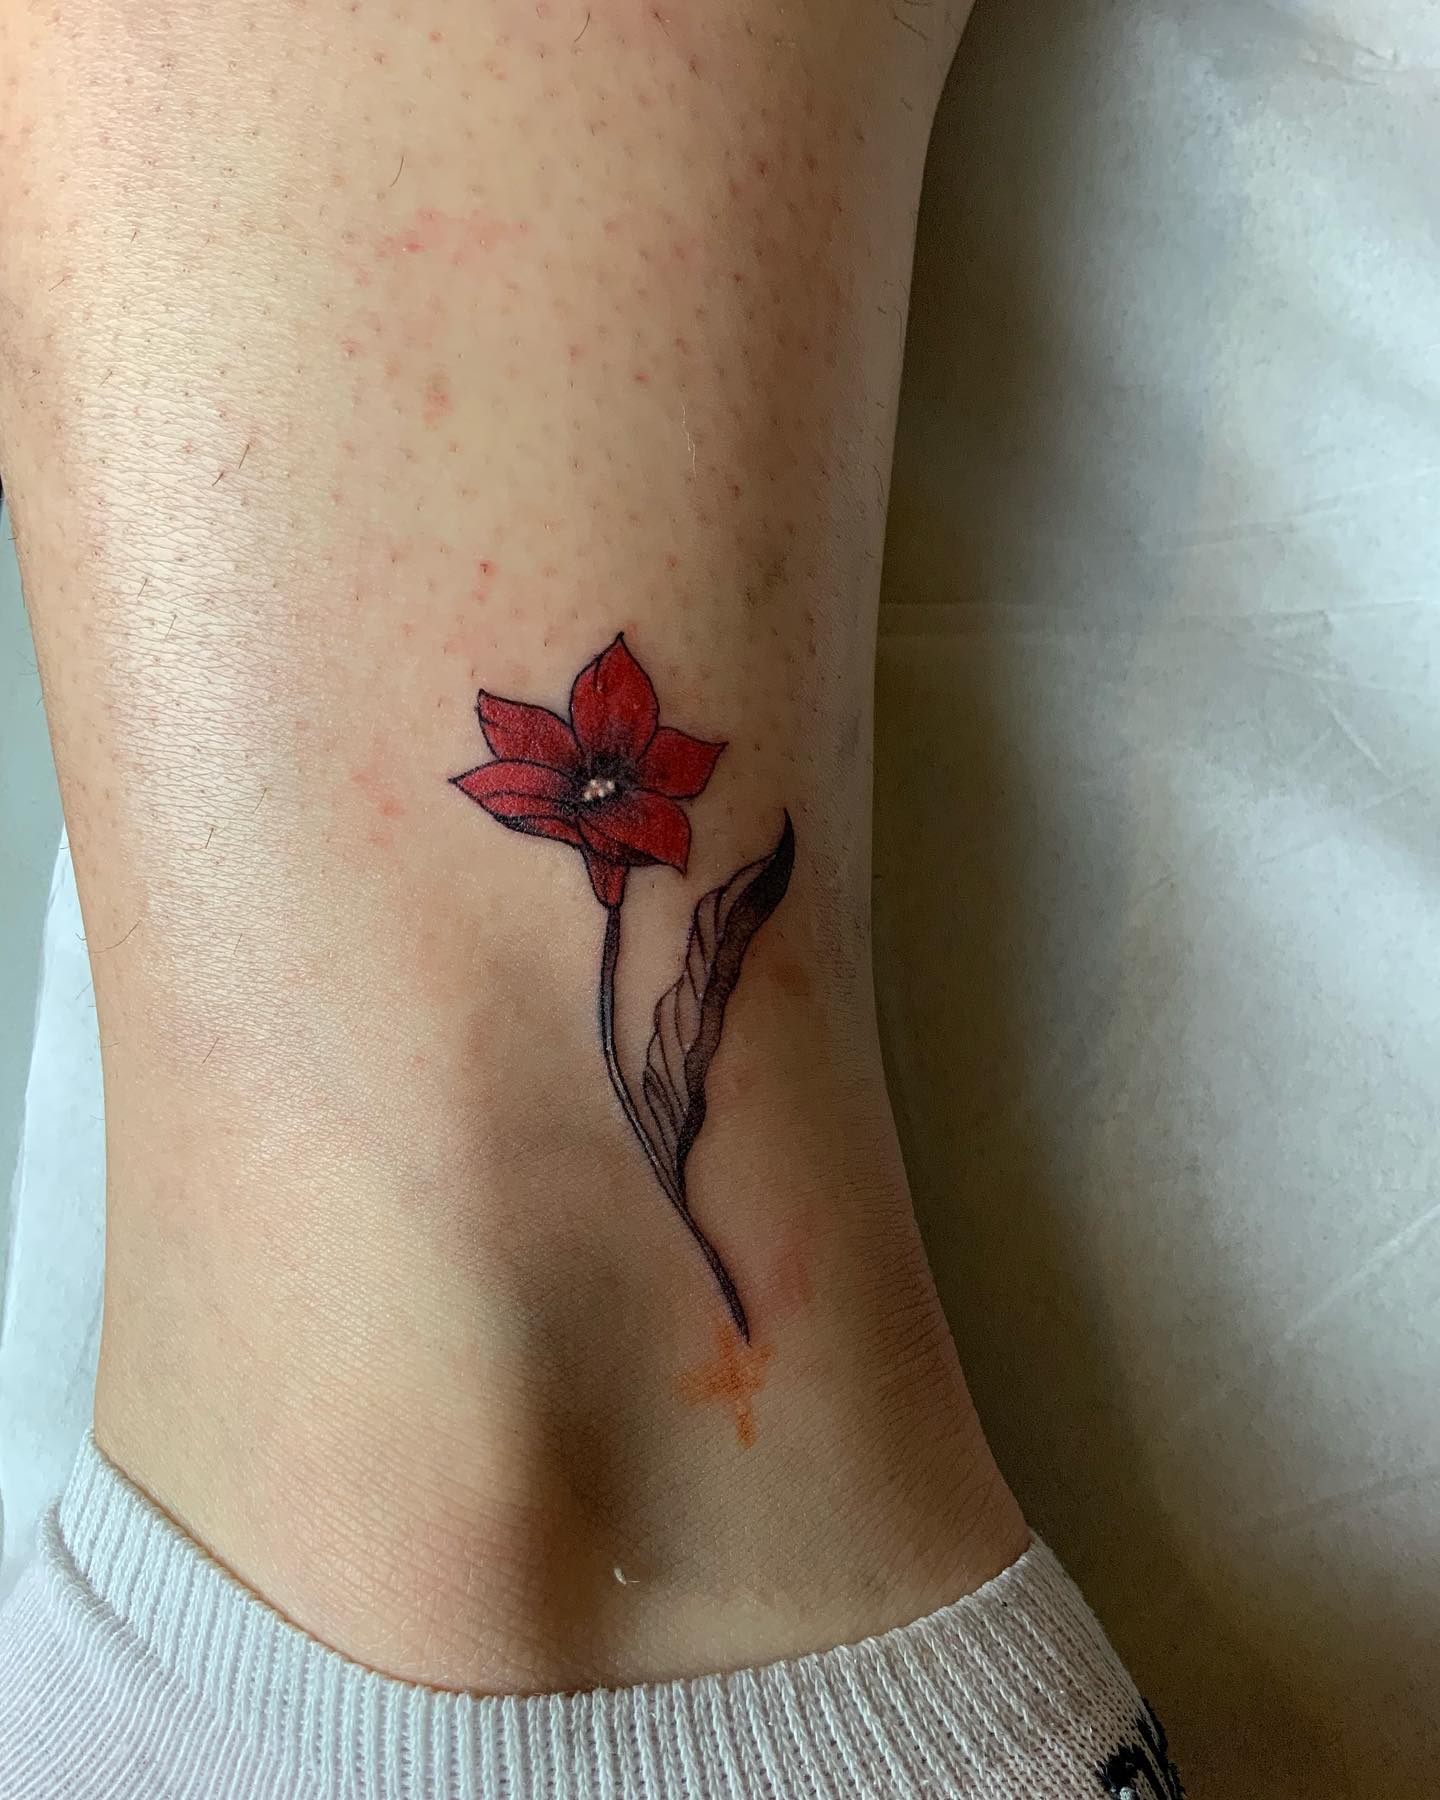 In the world of tattoos, small red lily is a symbol that represents the heart. It's an open flower that looks like a heart, but with a red color and a dark center. The small red lily tattoo is often used to represent love, passion, and desire.